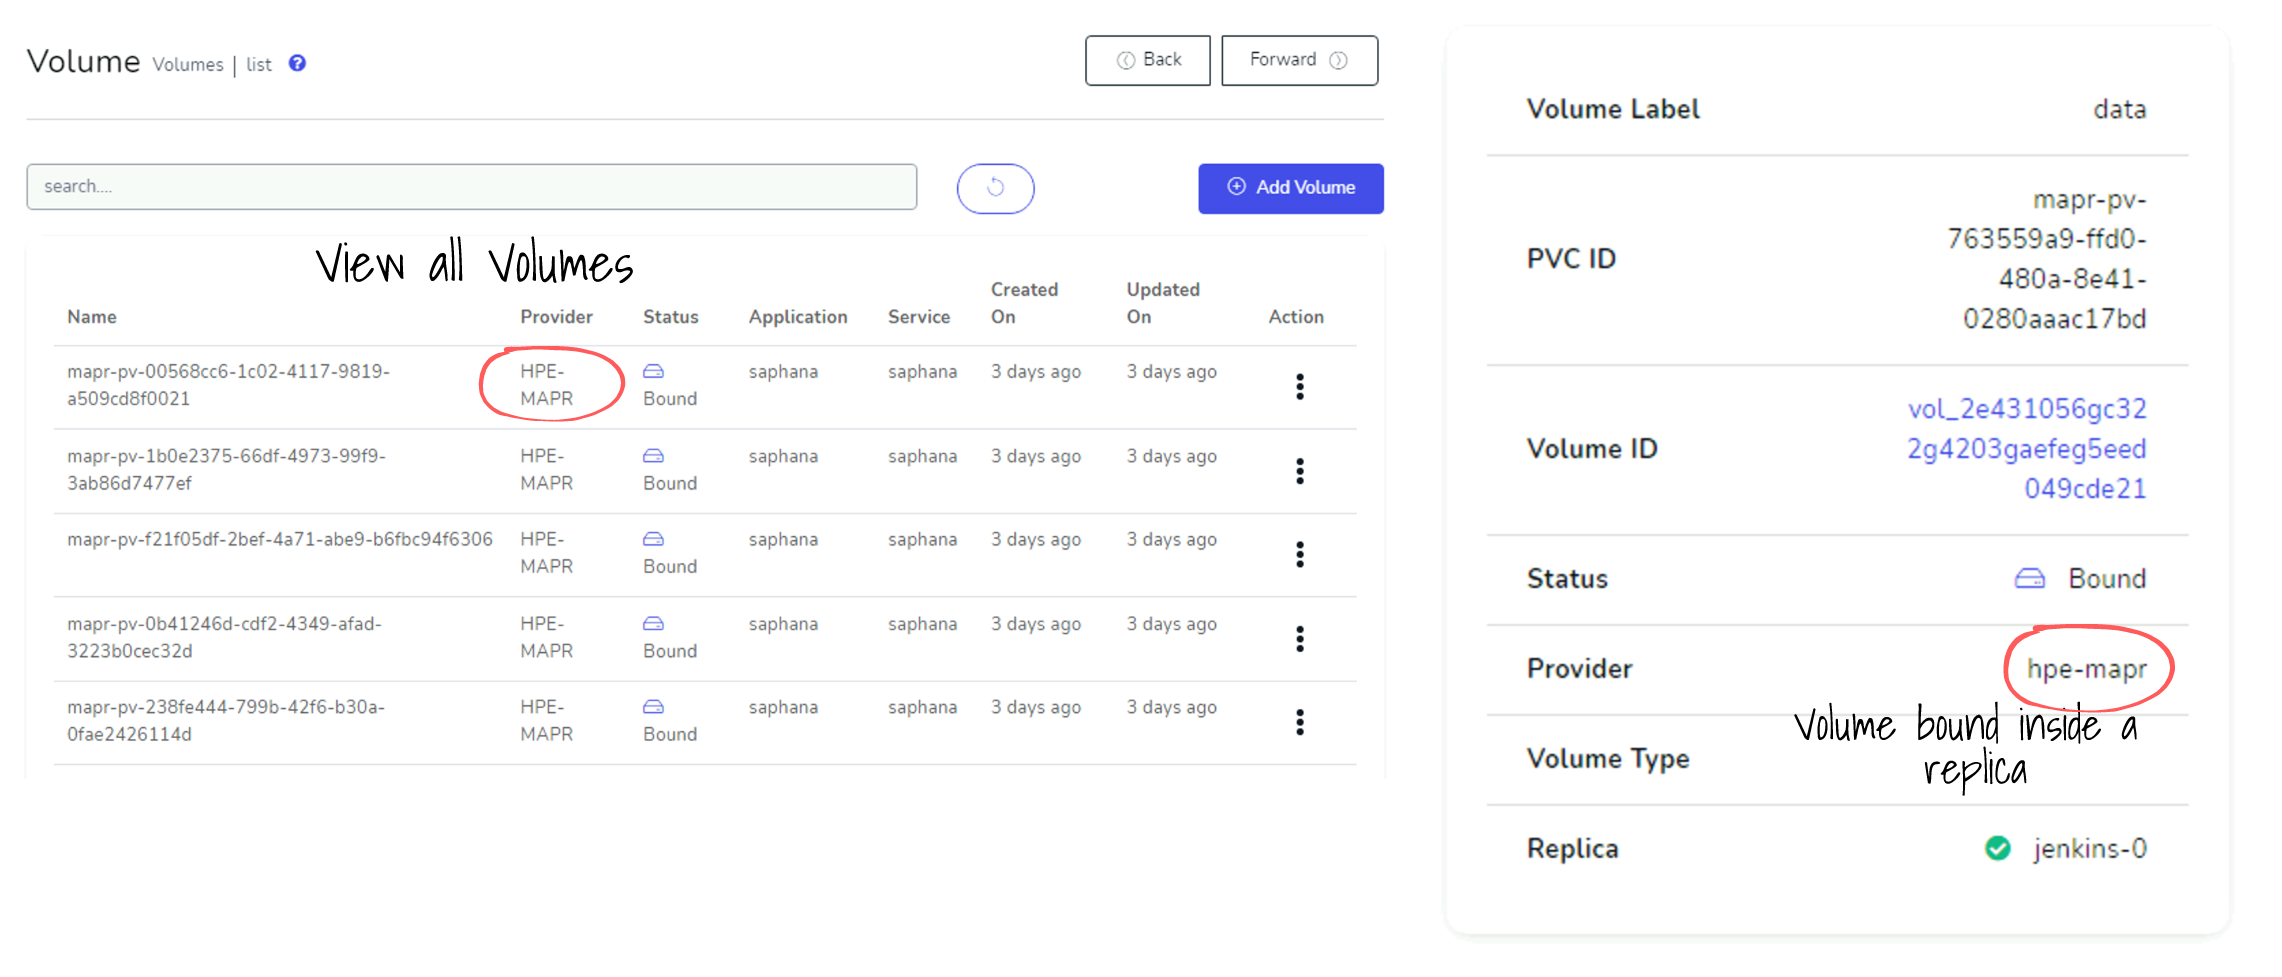 gopaddle dashboard for volumes